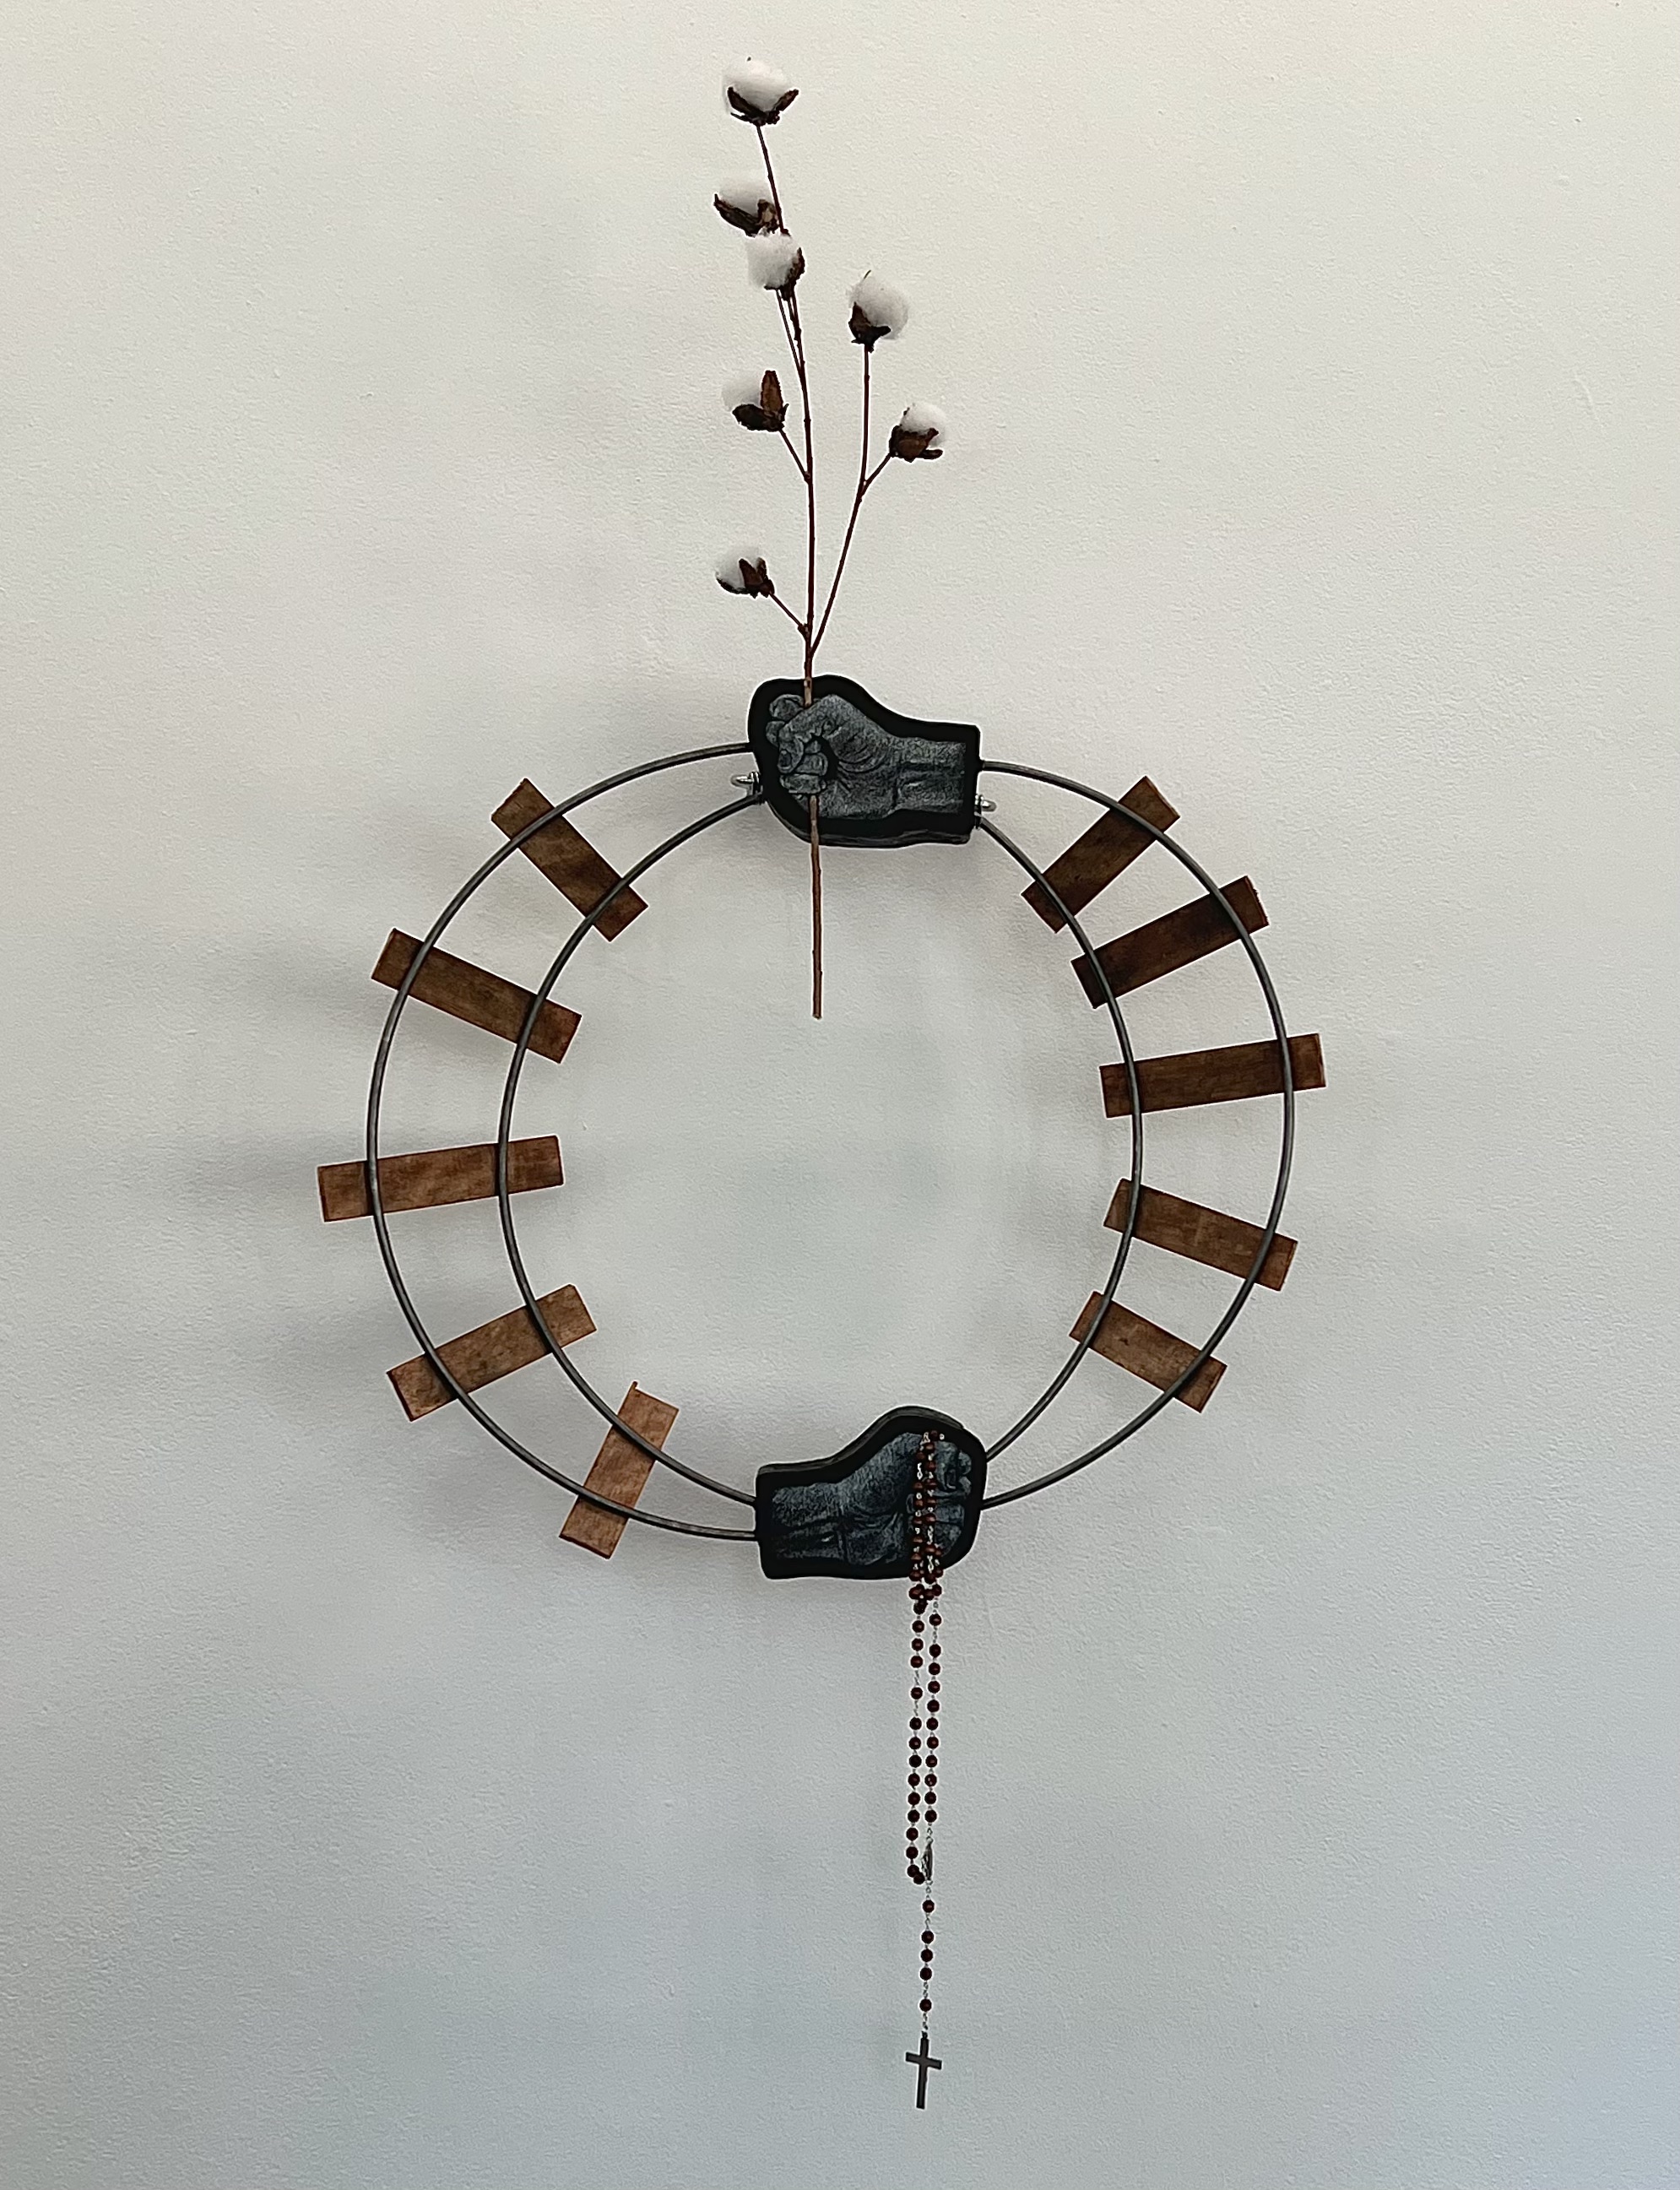 Metal, wood, and plant sculpture in the shape of a circle, with hands grasping objects near the top and bottom